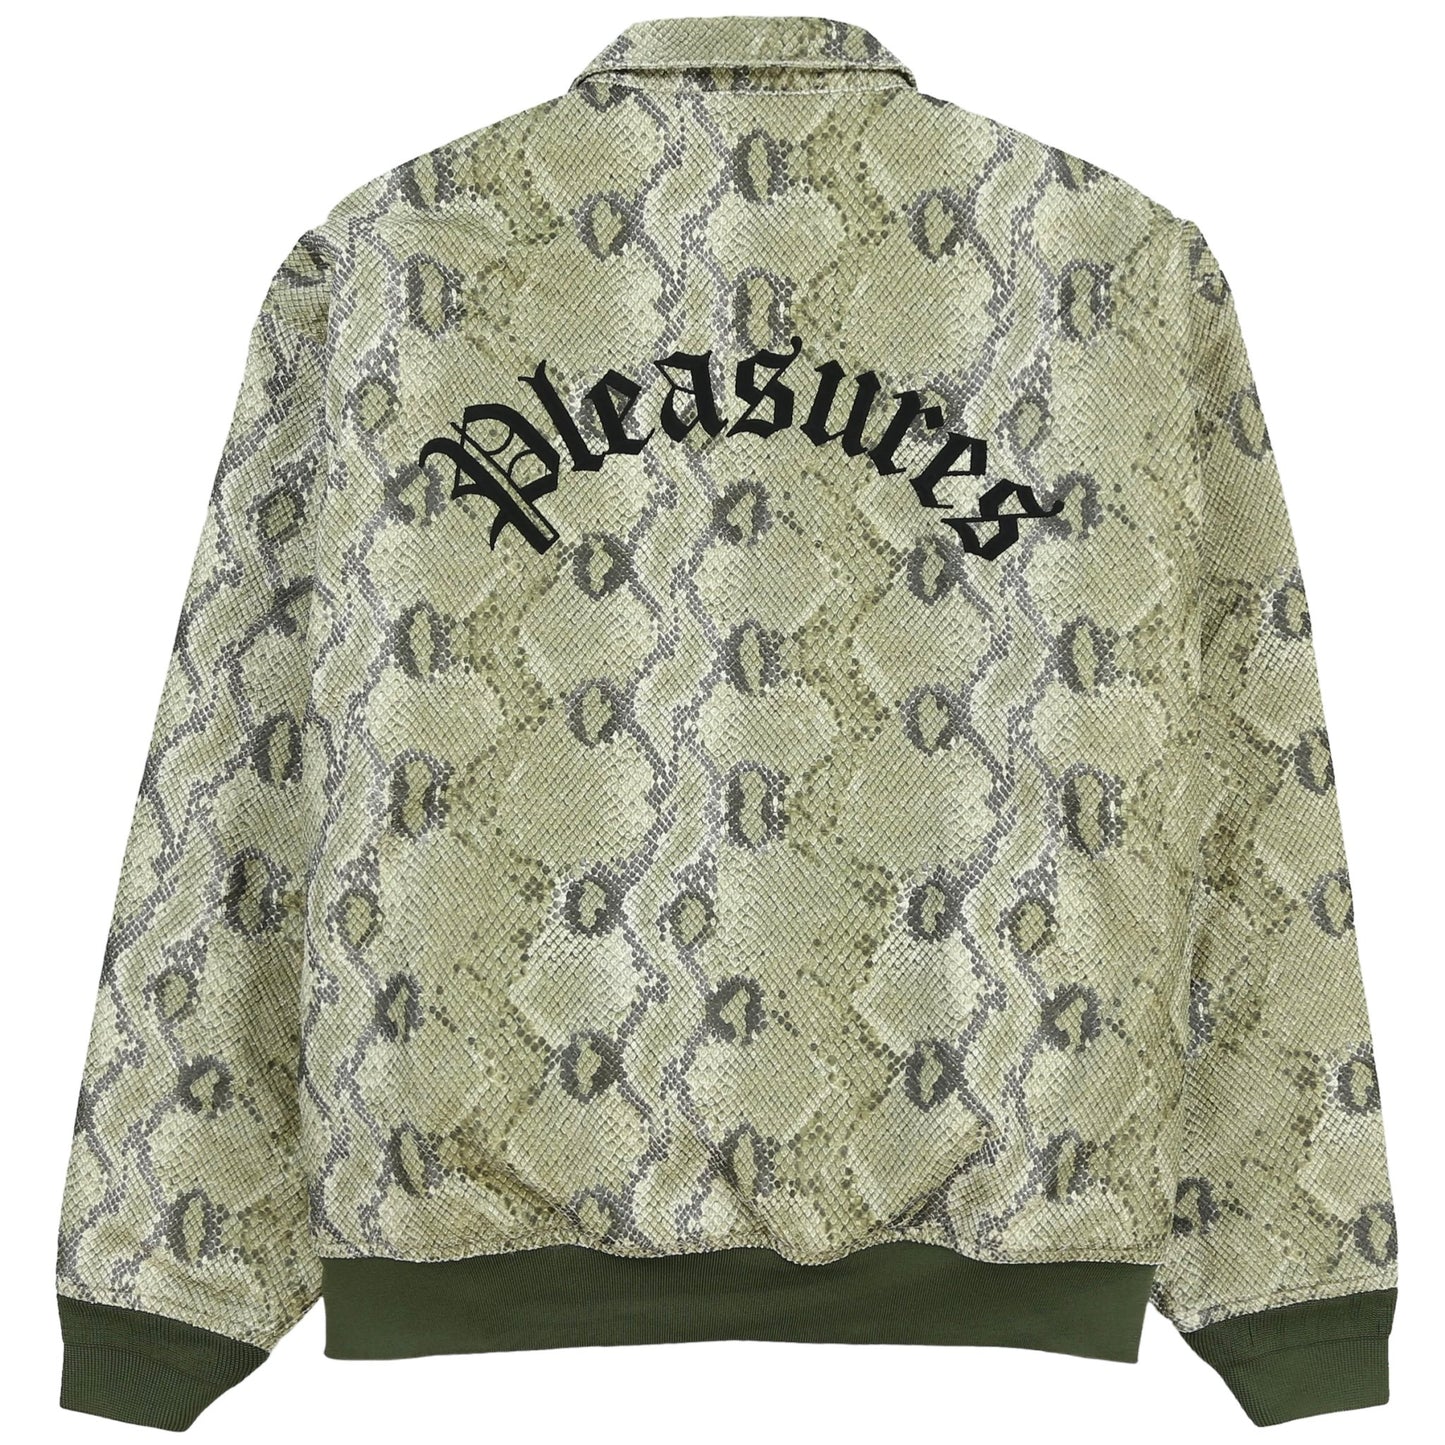 A green snakeskin bomber jacket with embroidery and the word "PLEASURES" on it.